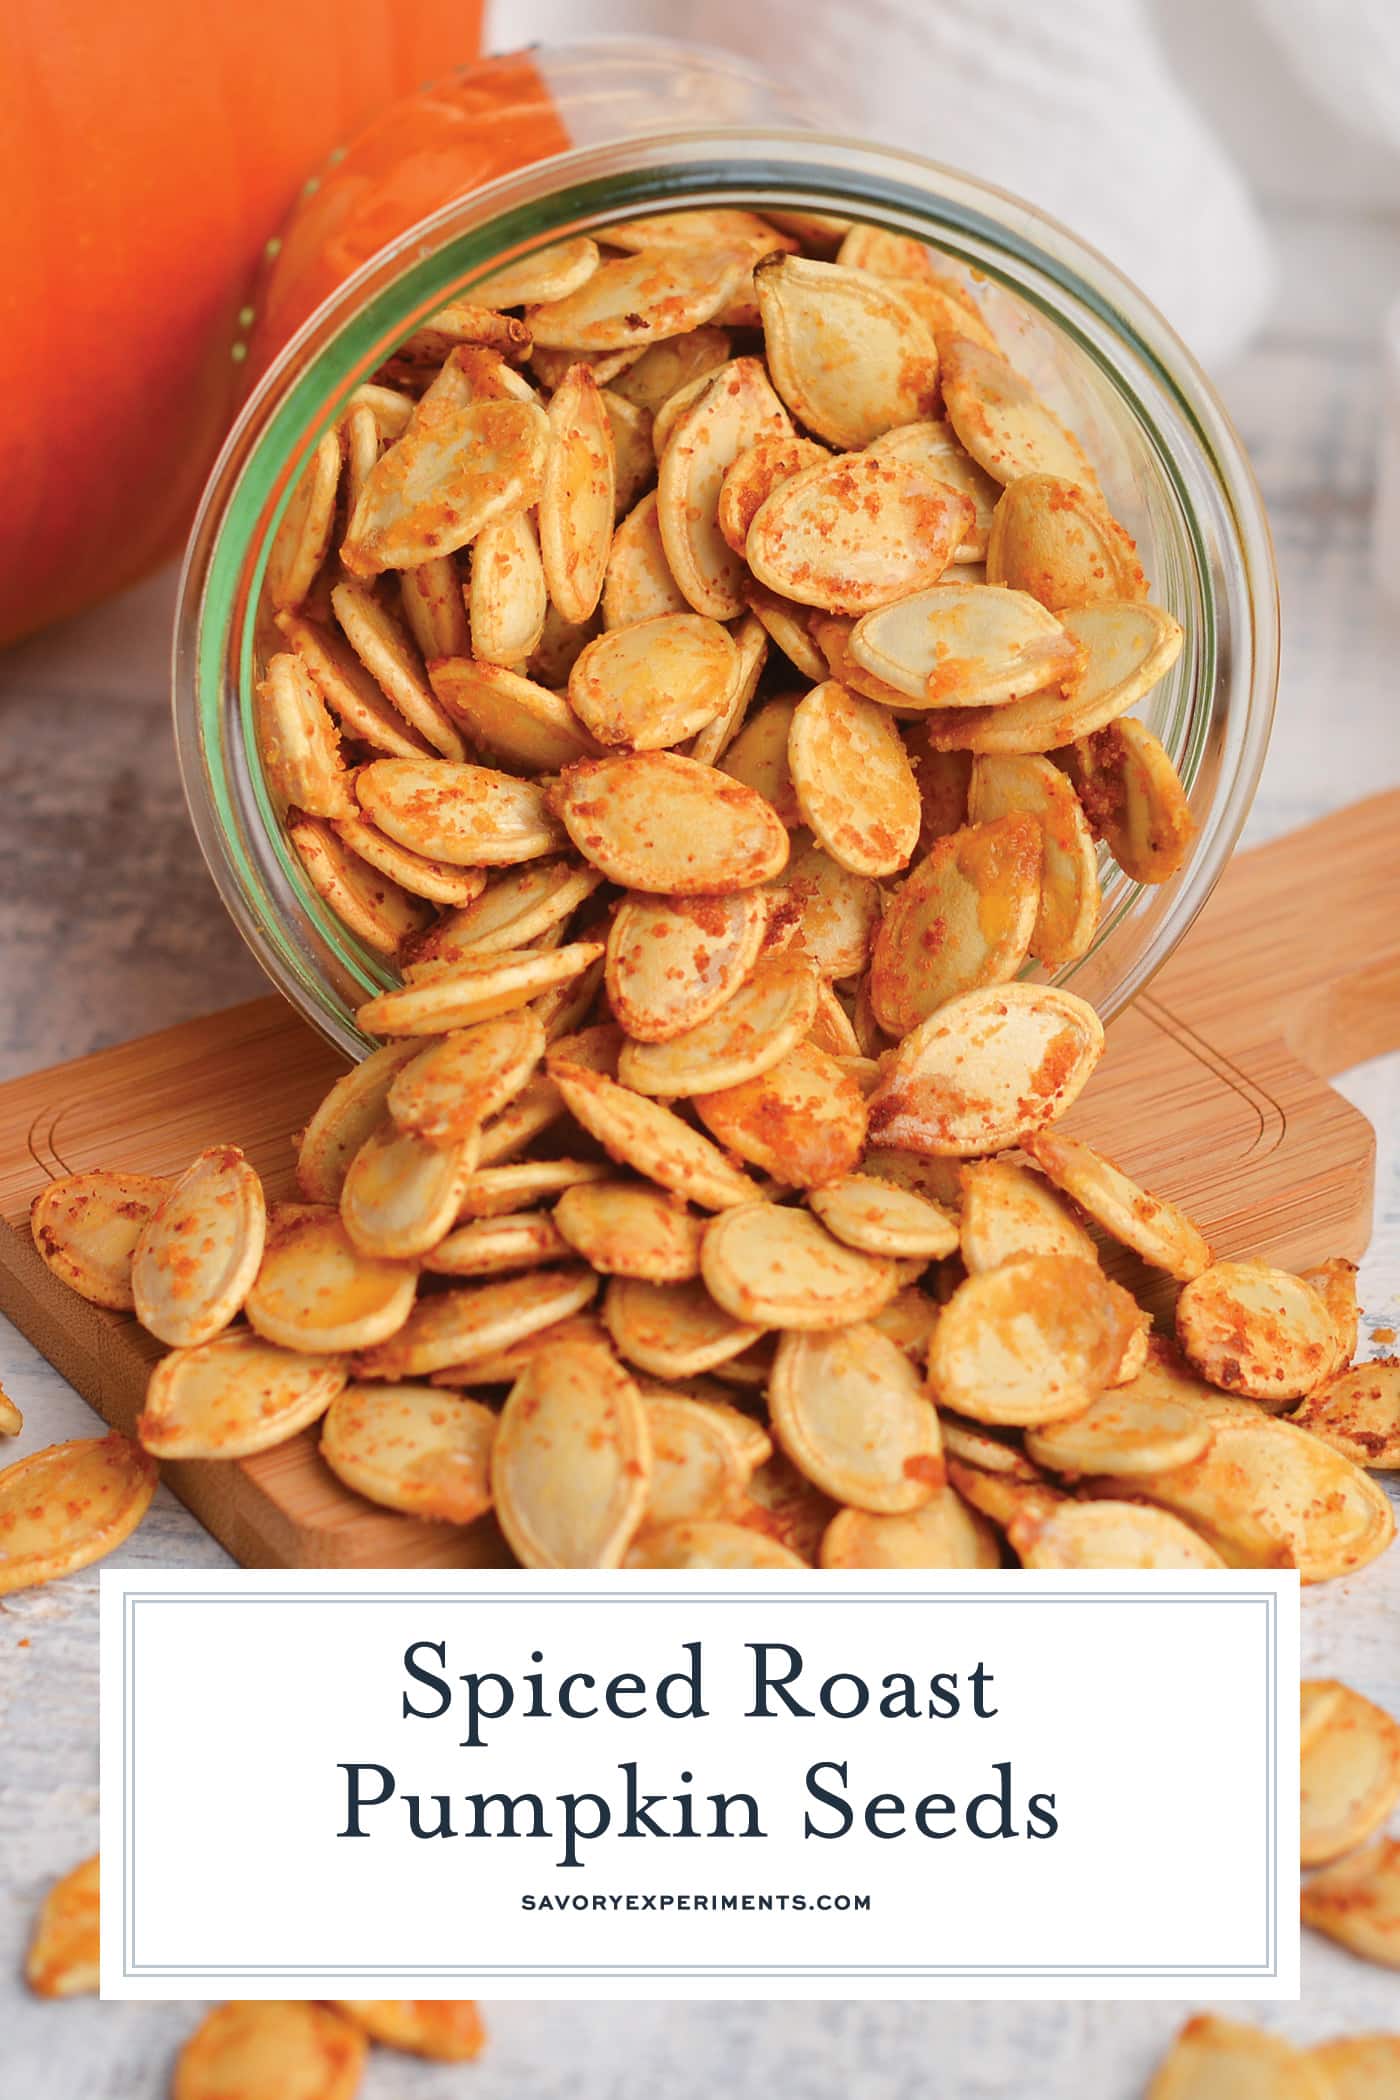 spiced roasted pumpkin seeds with text overlay